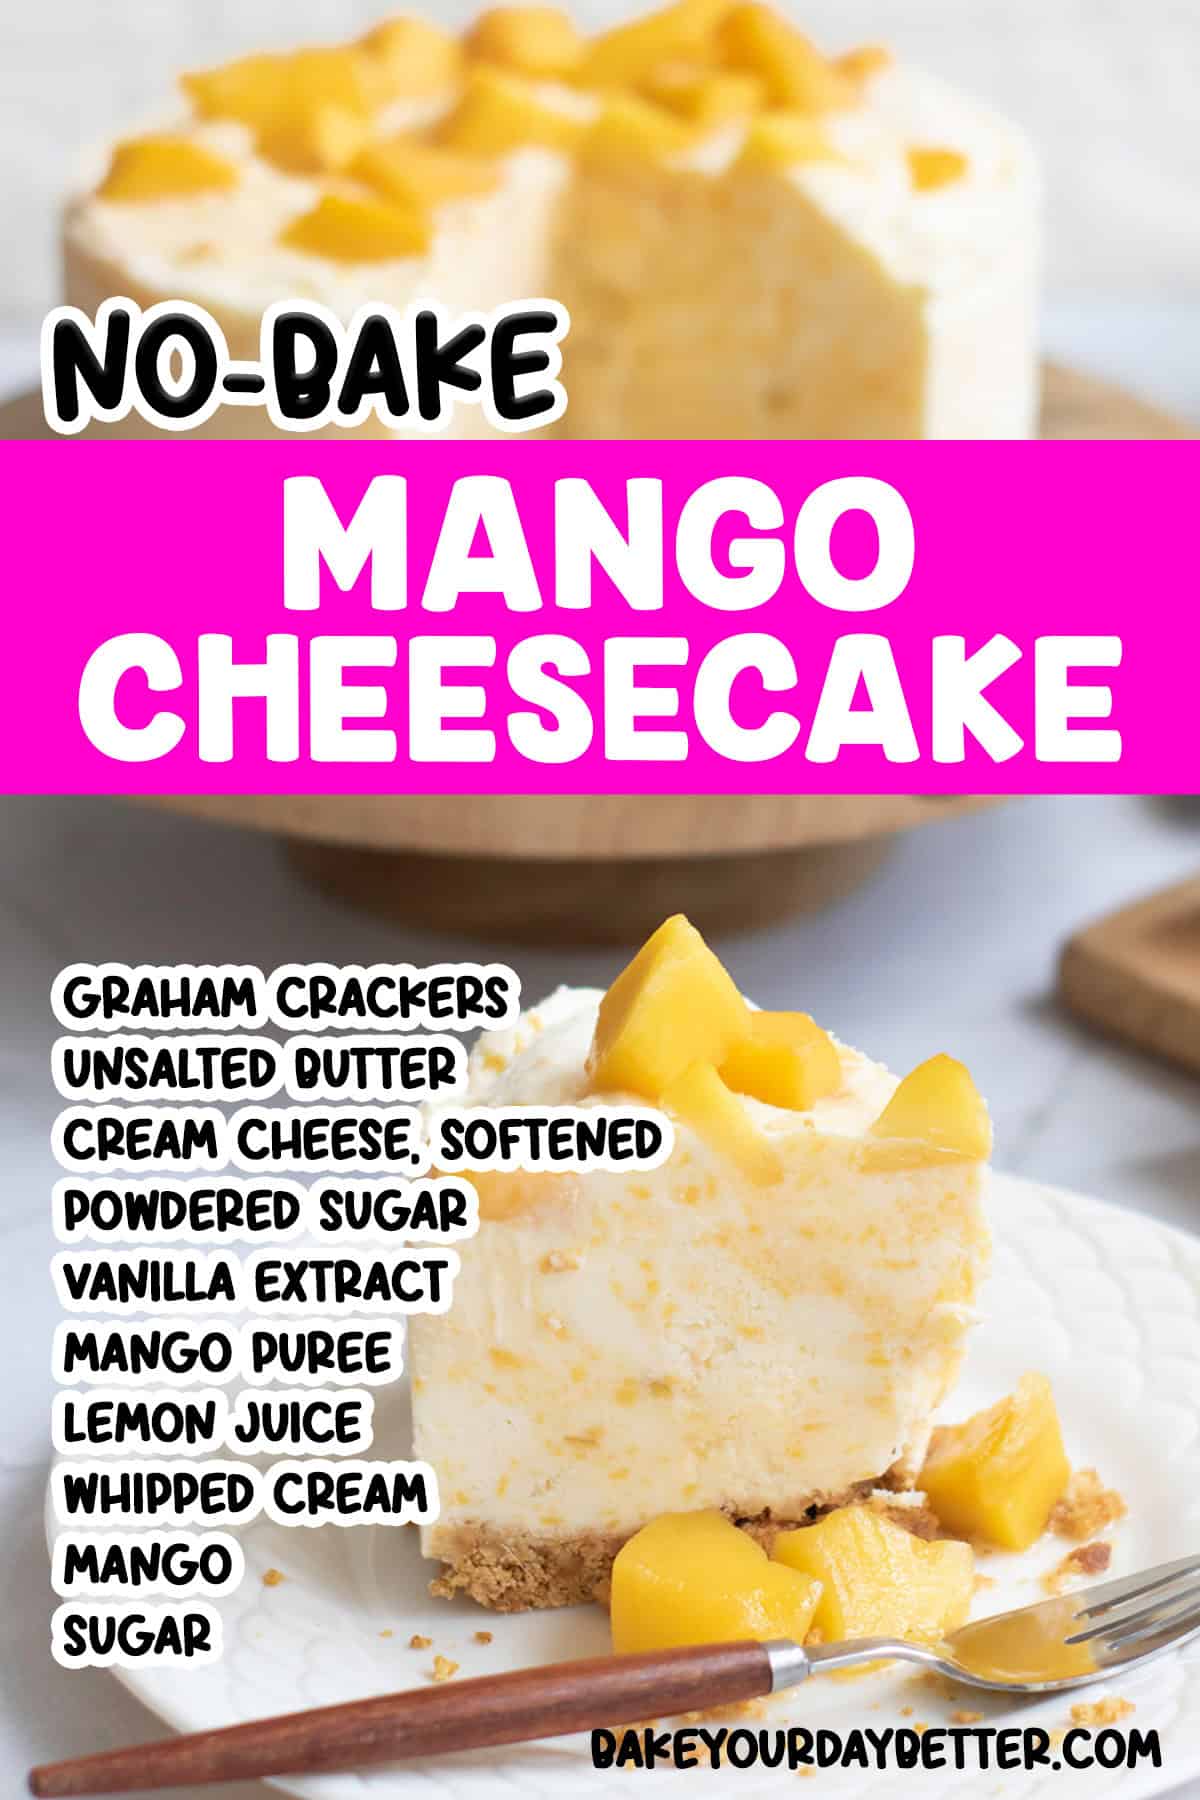 picture of mango cheesecake with text overlay that lists recipe ingredients